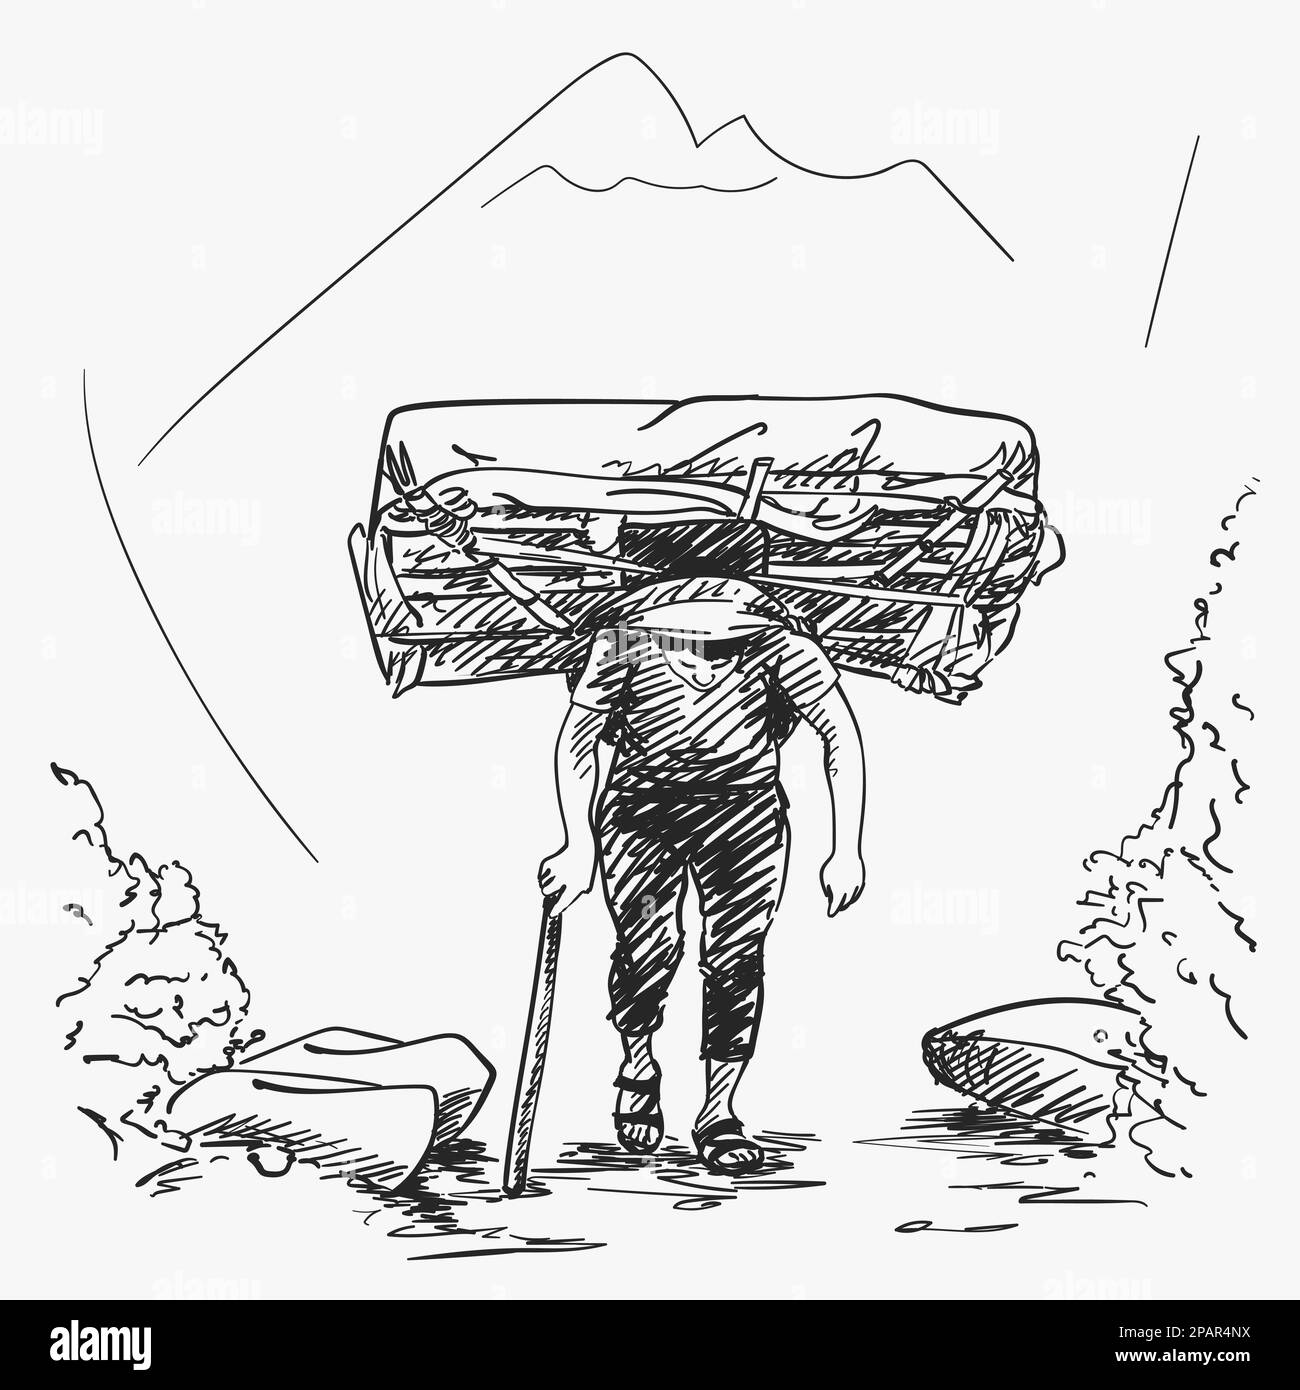 Sketch of nepali porter carrying full load heavy basket on his head in traditional way in mountains, Hand drawn illustration Stock Vector